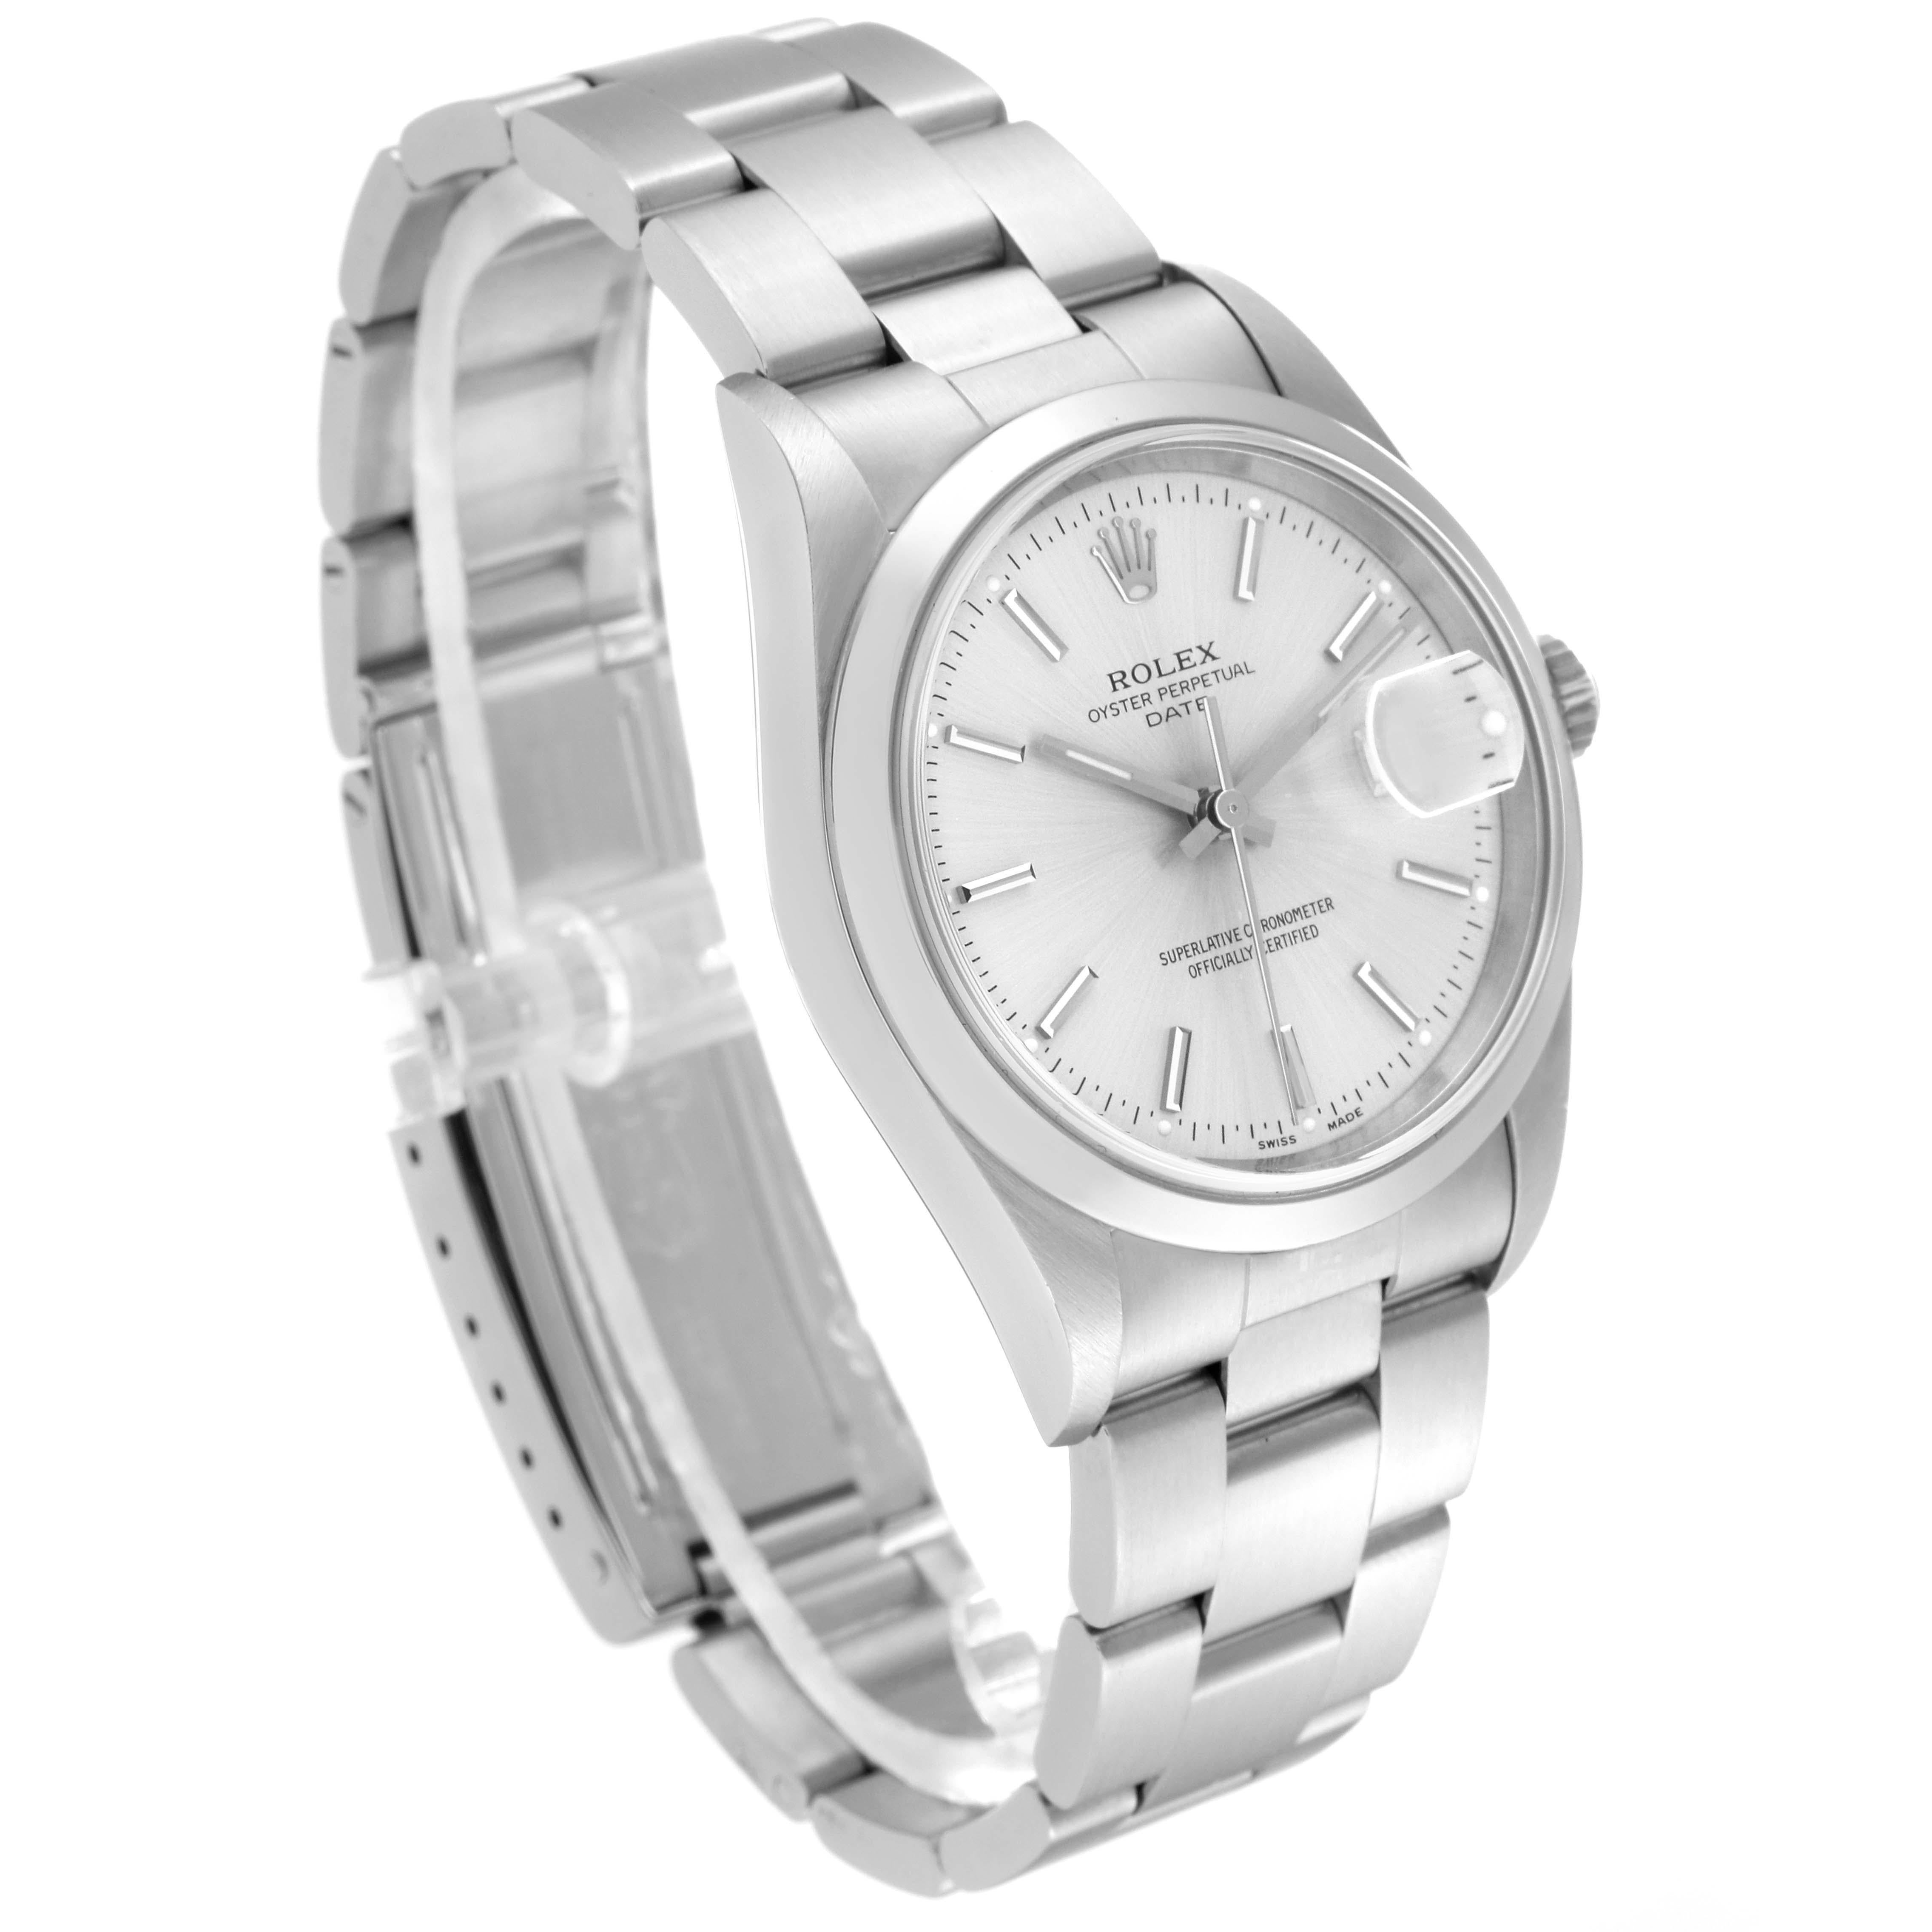 Rolex Date Silver Dial Smooth Bezel Steel Mens Watch 15200 For Sale 1